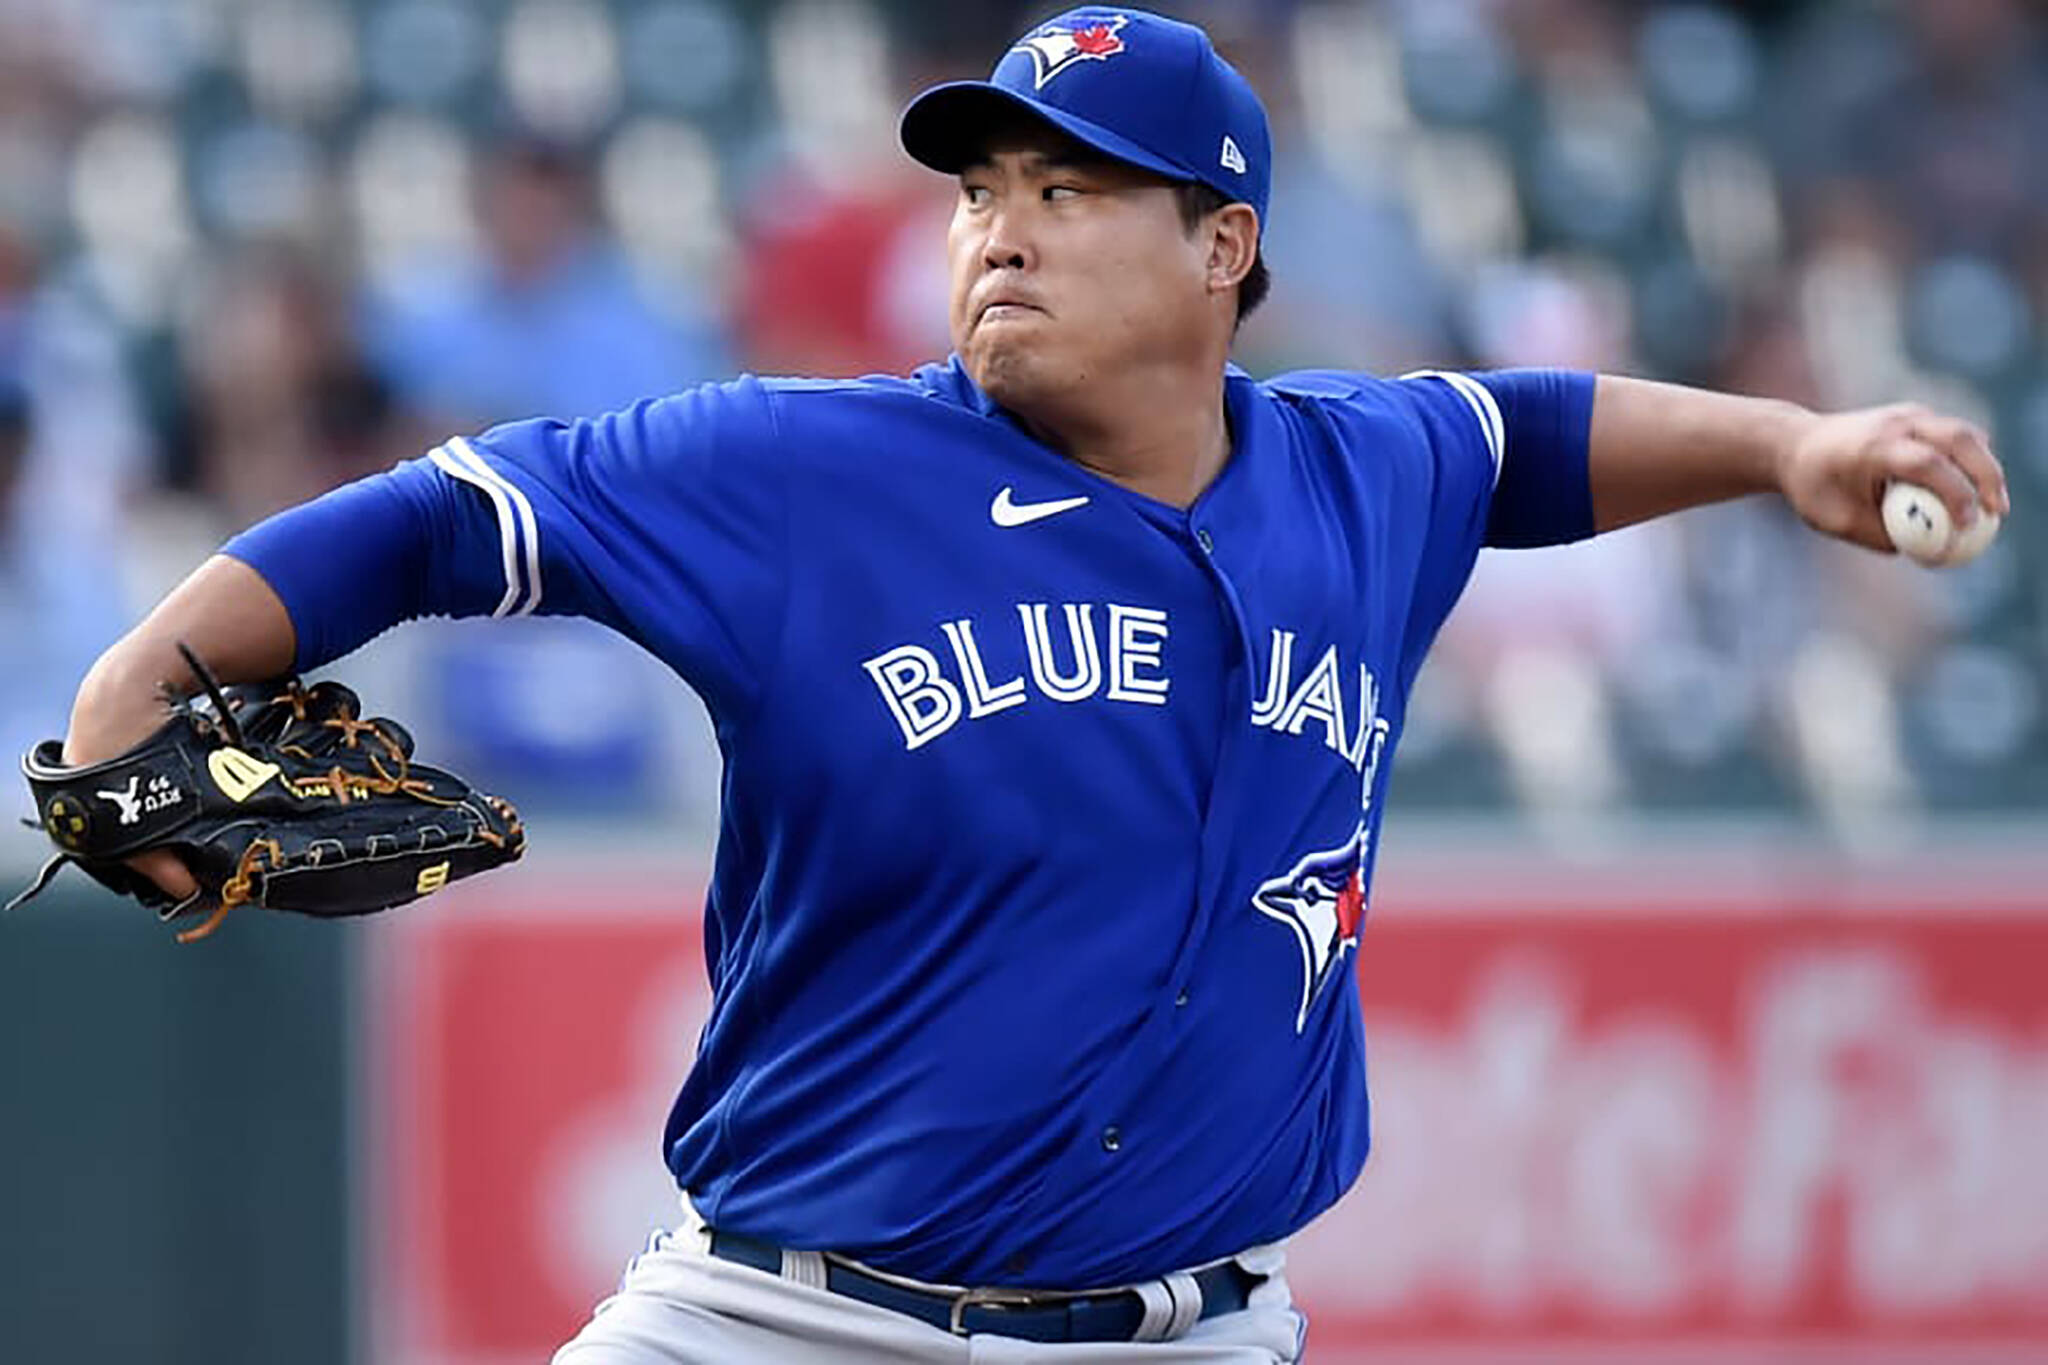 Toronto Blue Jays pitcher expected to return after potential